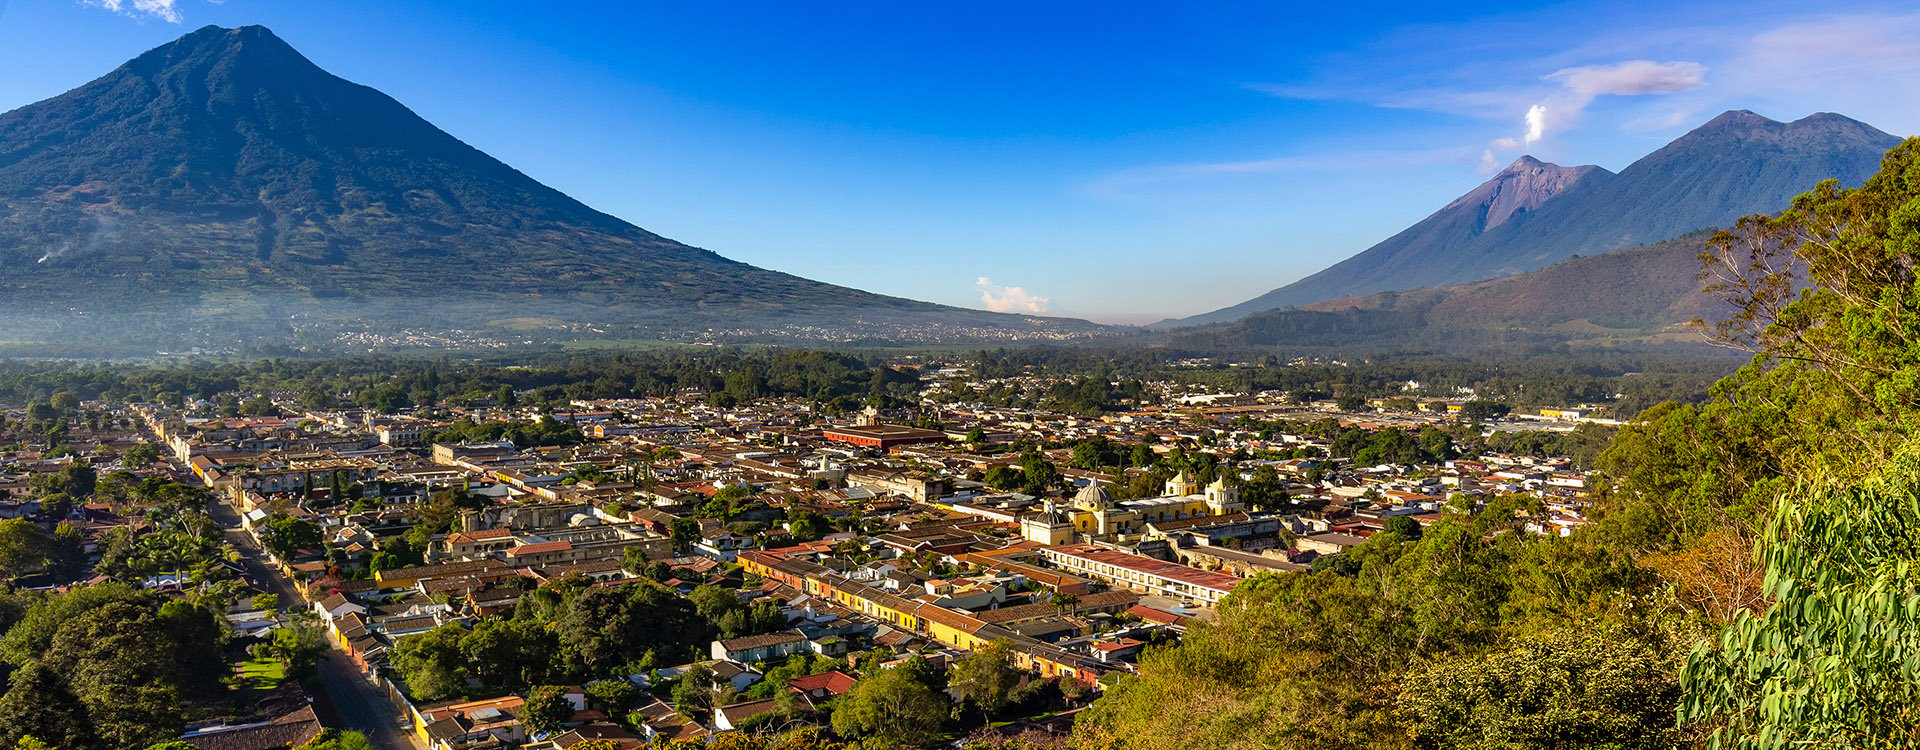 Guatemala. Antigua. Panoramic view of the city and surrounding volcanoes (from left to right): dormant Agua, smoky Fuego and Acatenango